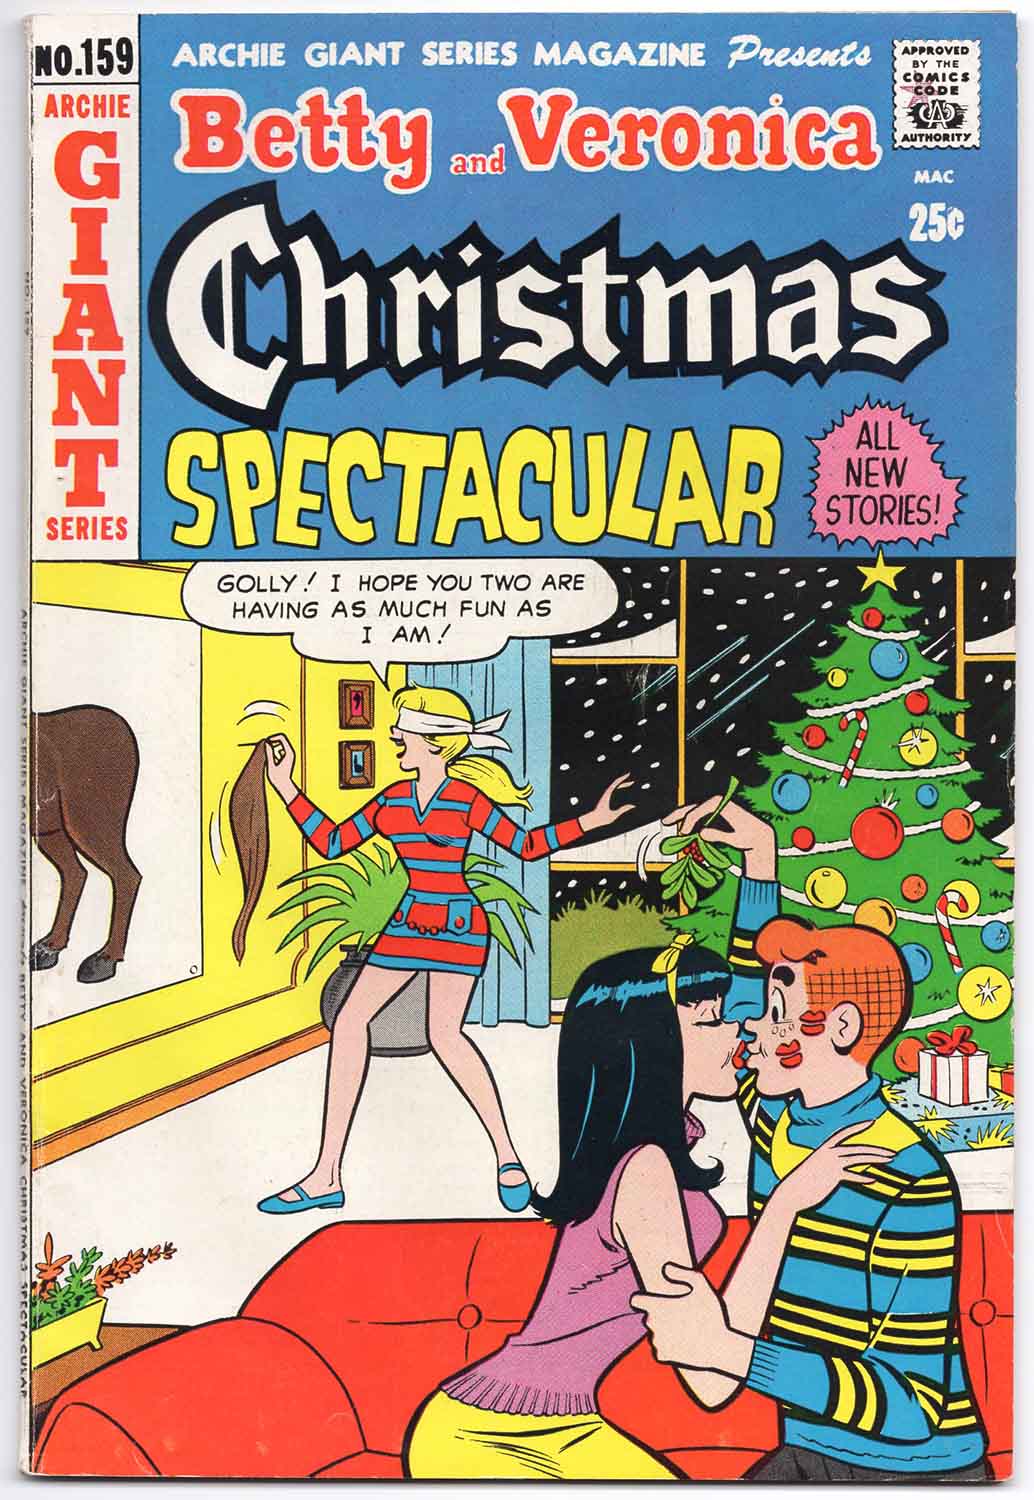 Archie Giant Series #159